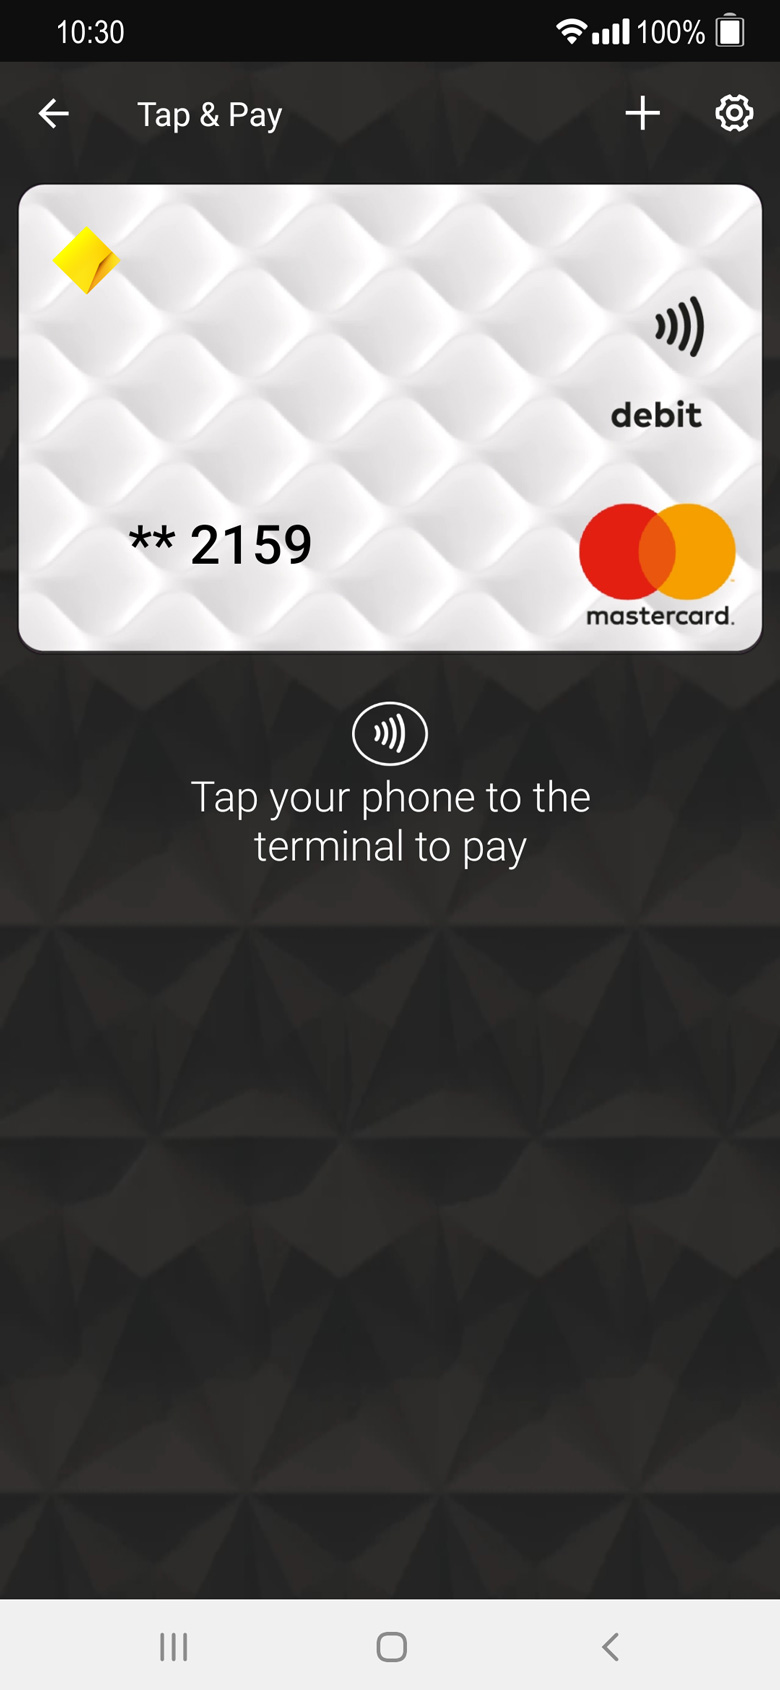 CommBank app showing selected Tap & Pay card